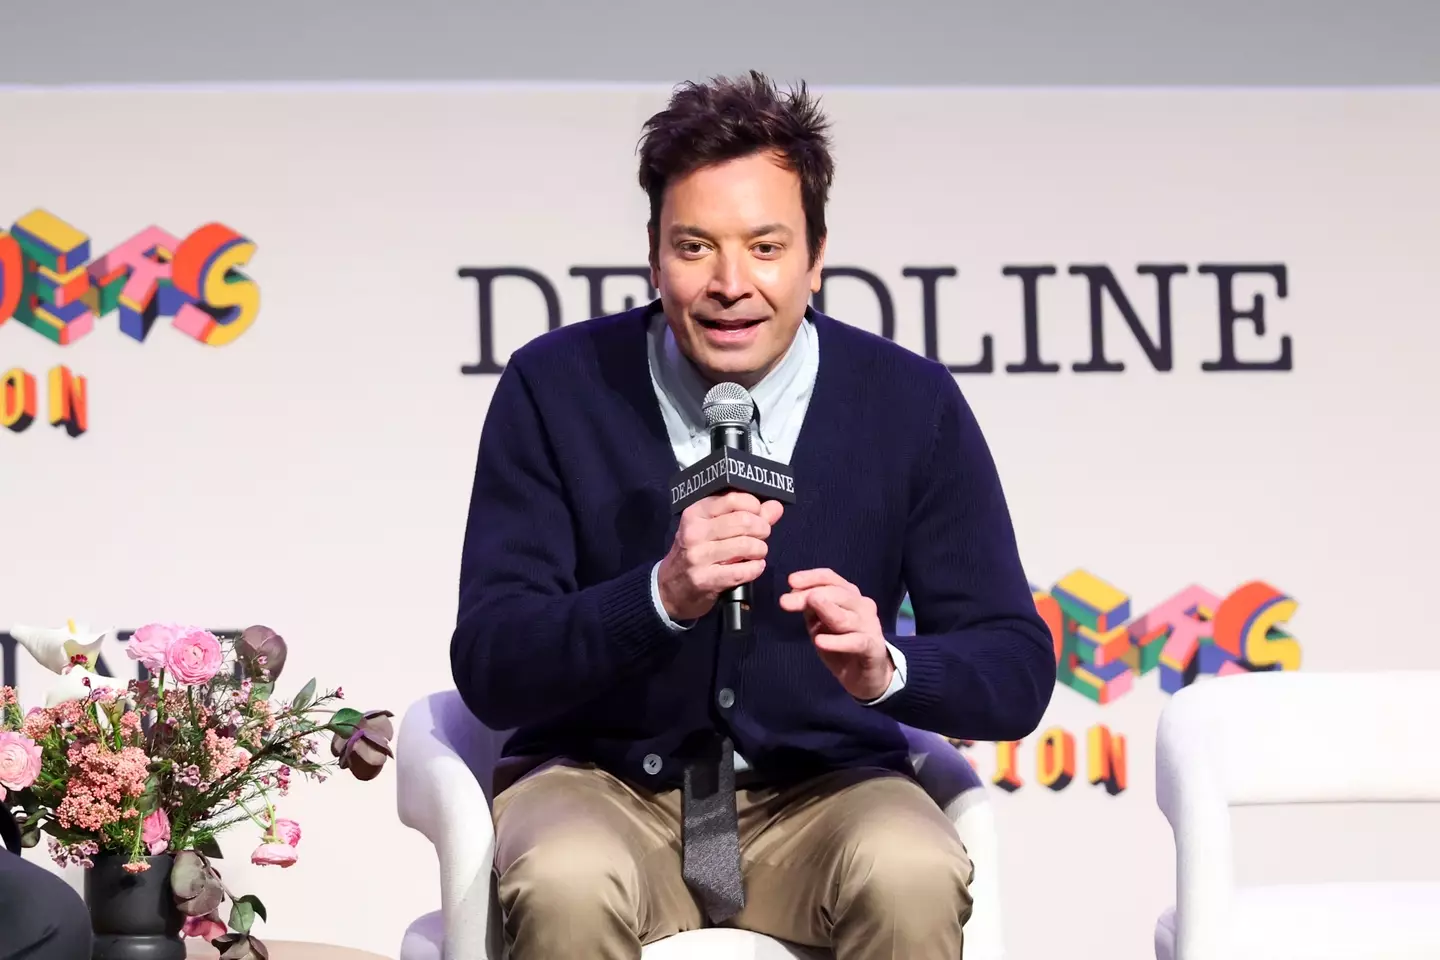 Jimmy Fallon was shocked after a celeb said she had a crush on him (Rich Polk/Deadline via Getty Images)